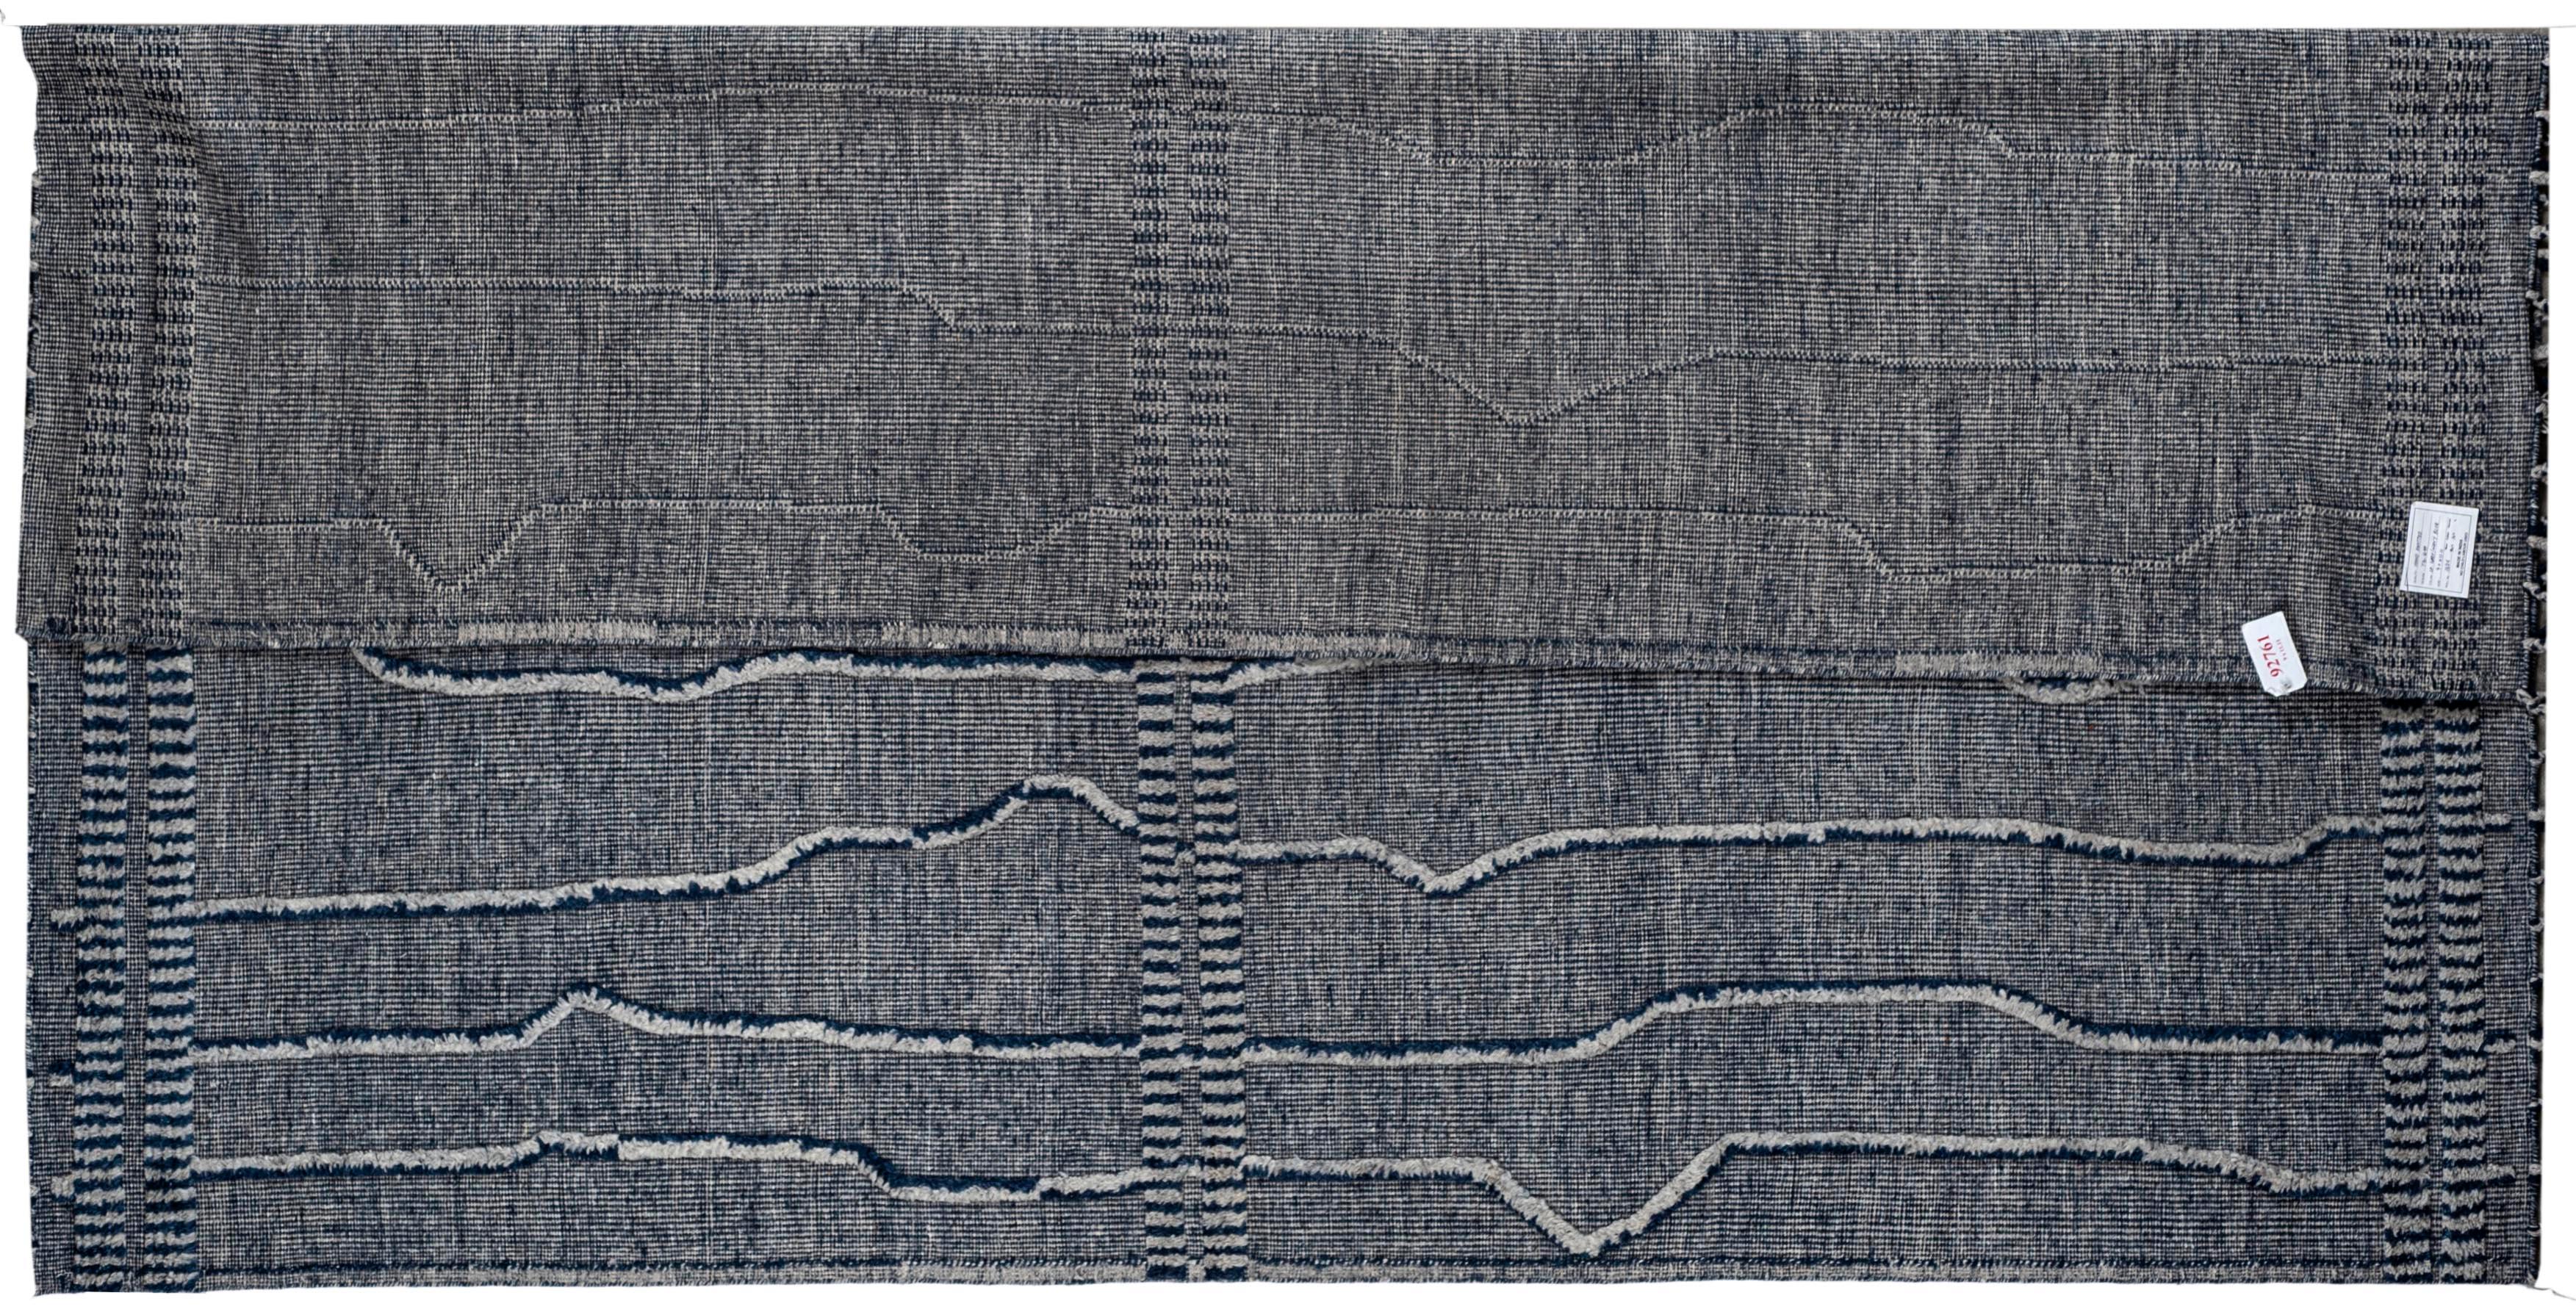 Coming from our newest collection of Moroccan designs, this 9x12 light grey and navy blue striped Moroccan design area rug is handmade and hand-knotted made in India. It has a cotton base and is made from all wool yarns. It features a contemporary